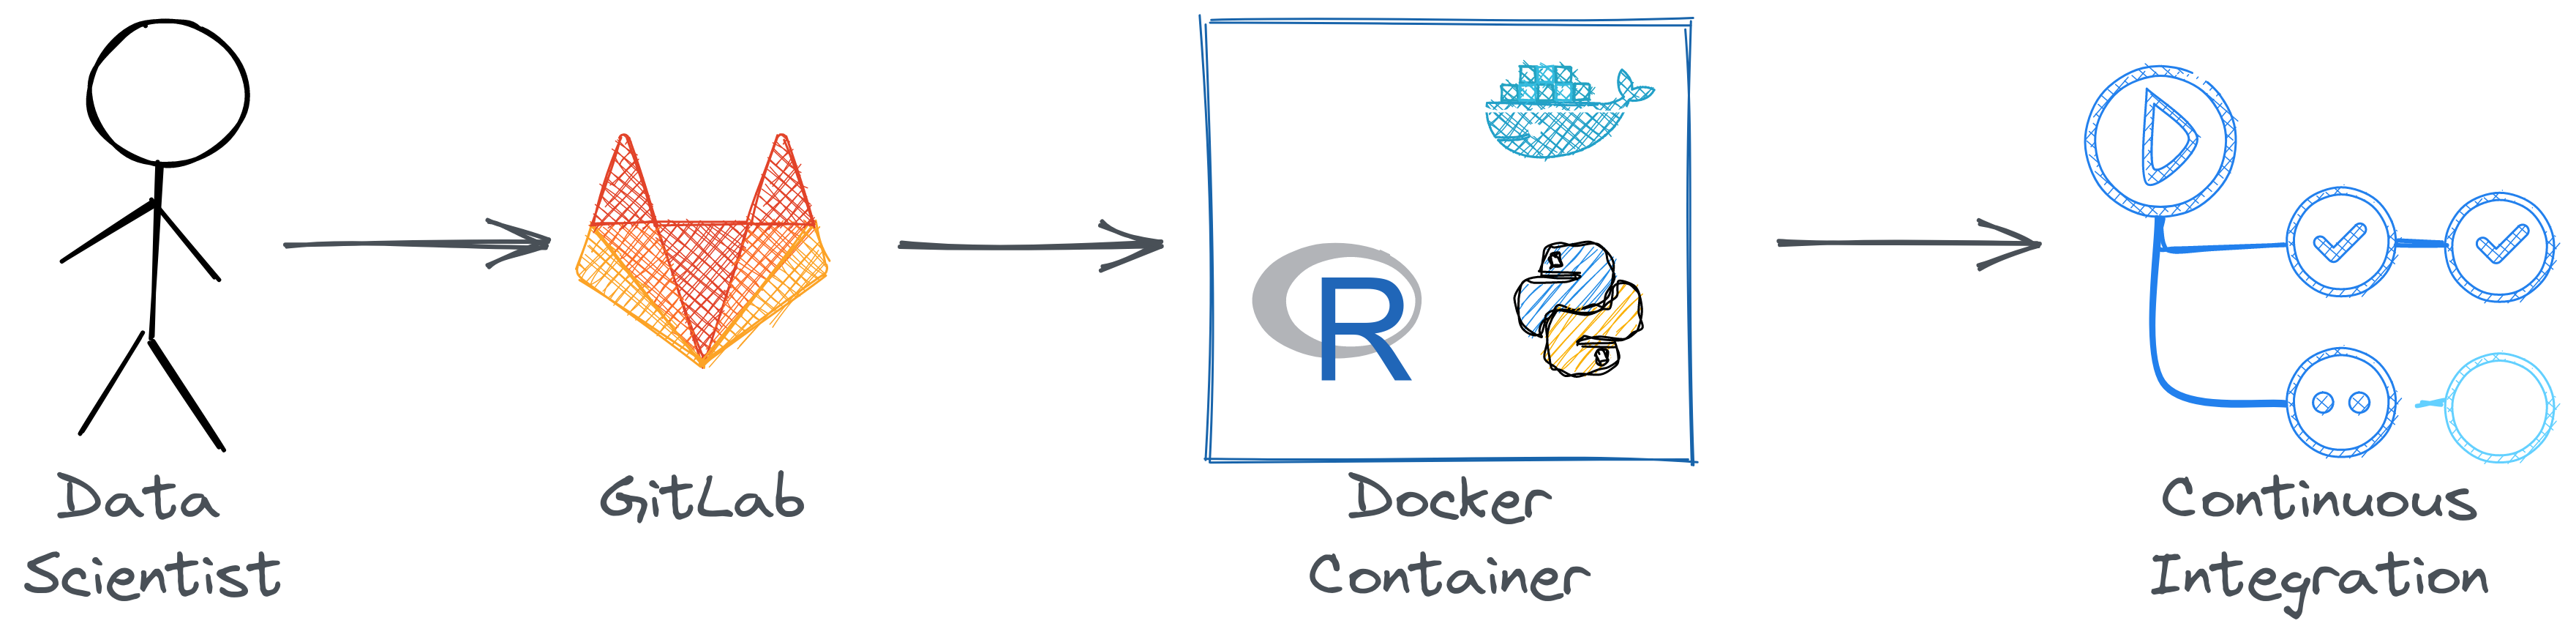 Cartoon showing arrows from Data scientist to GitLab to Docker container to Continuous Integration